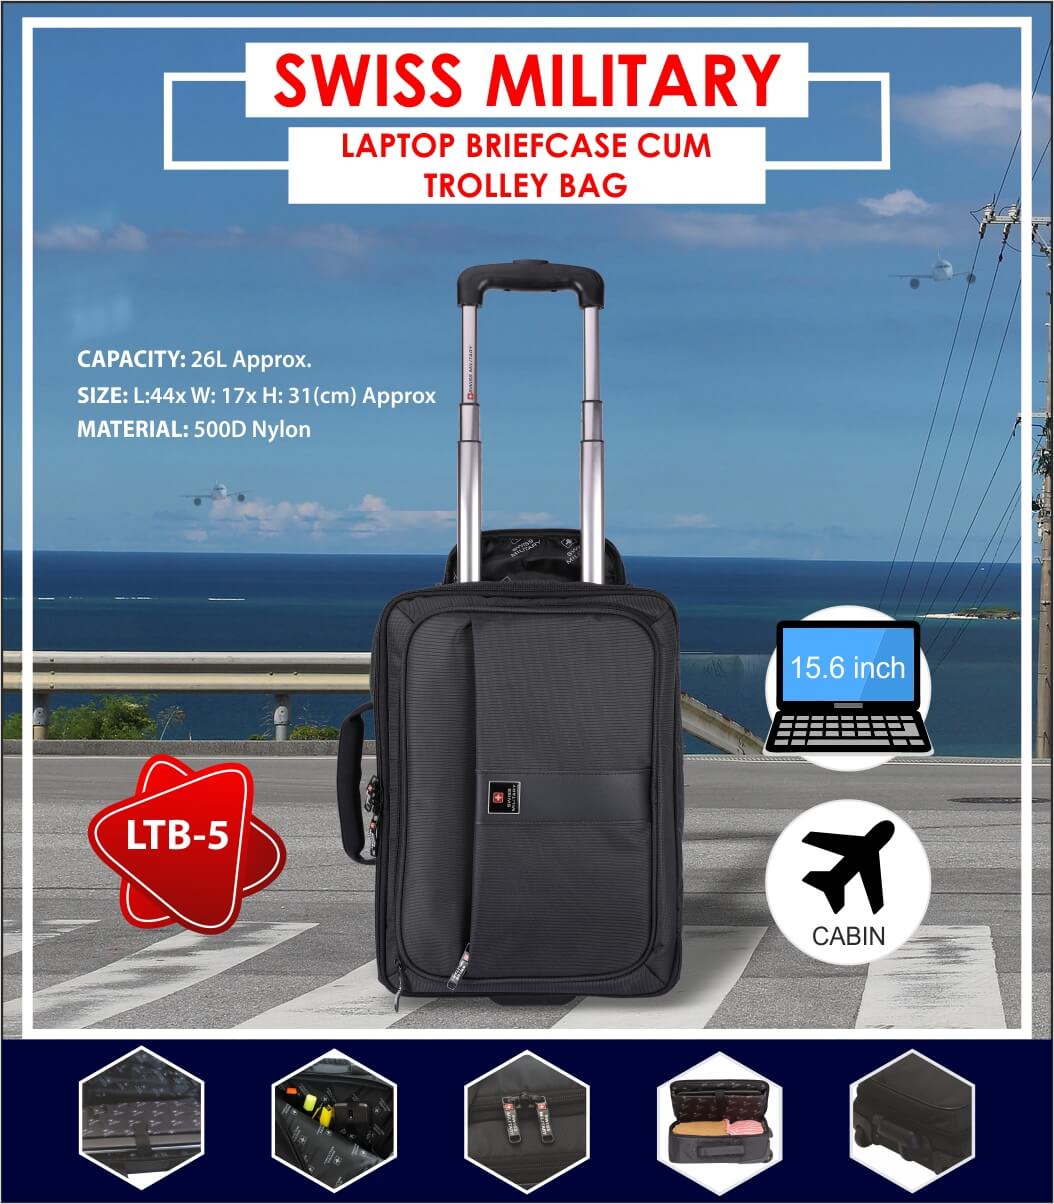 LTB5 - Laptop BriefCase Cum BackPack - SWISS MILITARY CONSUMER GOODS ...